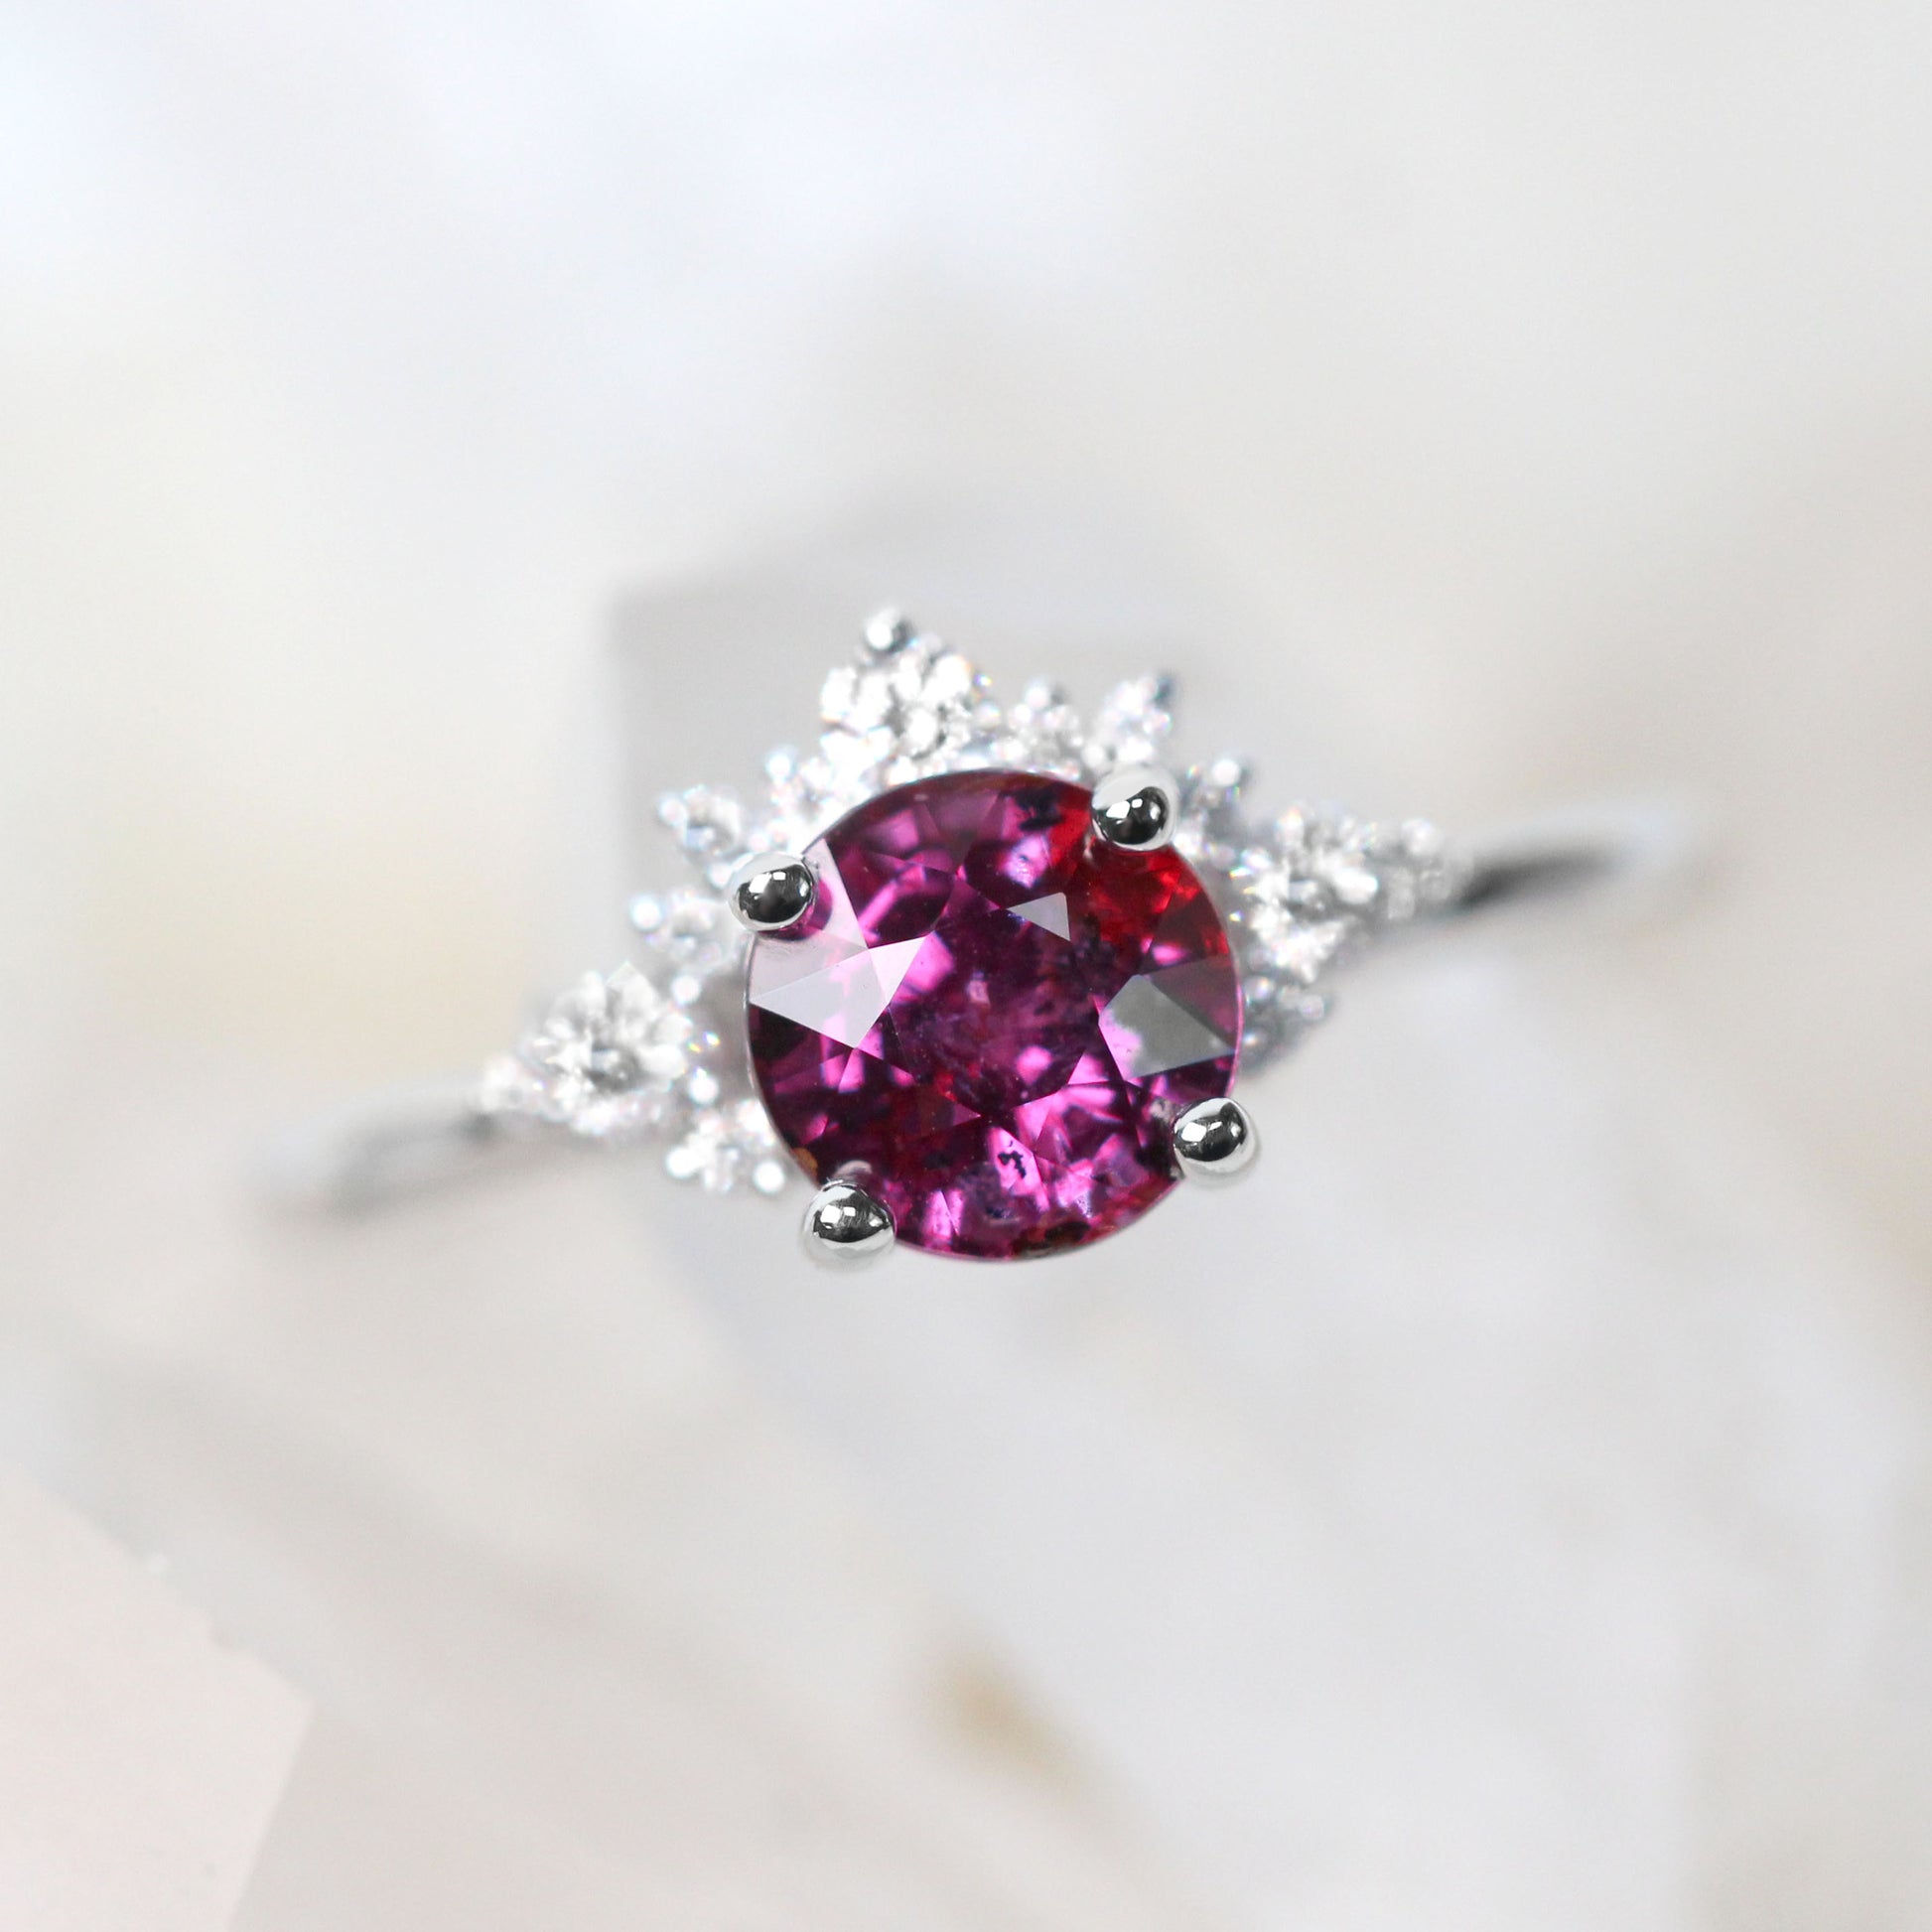 Athena Ring with a 1.72 Carat Round Purple Pink Sapphire and White Accent Diamonds in 14k White Gold - Ready to Size and Ship - Midwinter Co. Alternative Bridal Rings and Modern Fine Jewelry